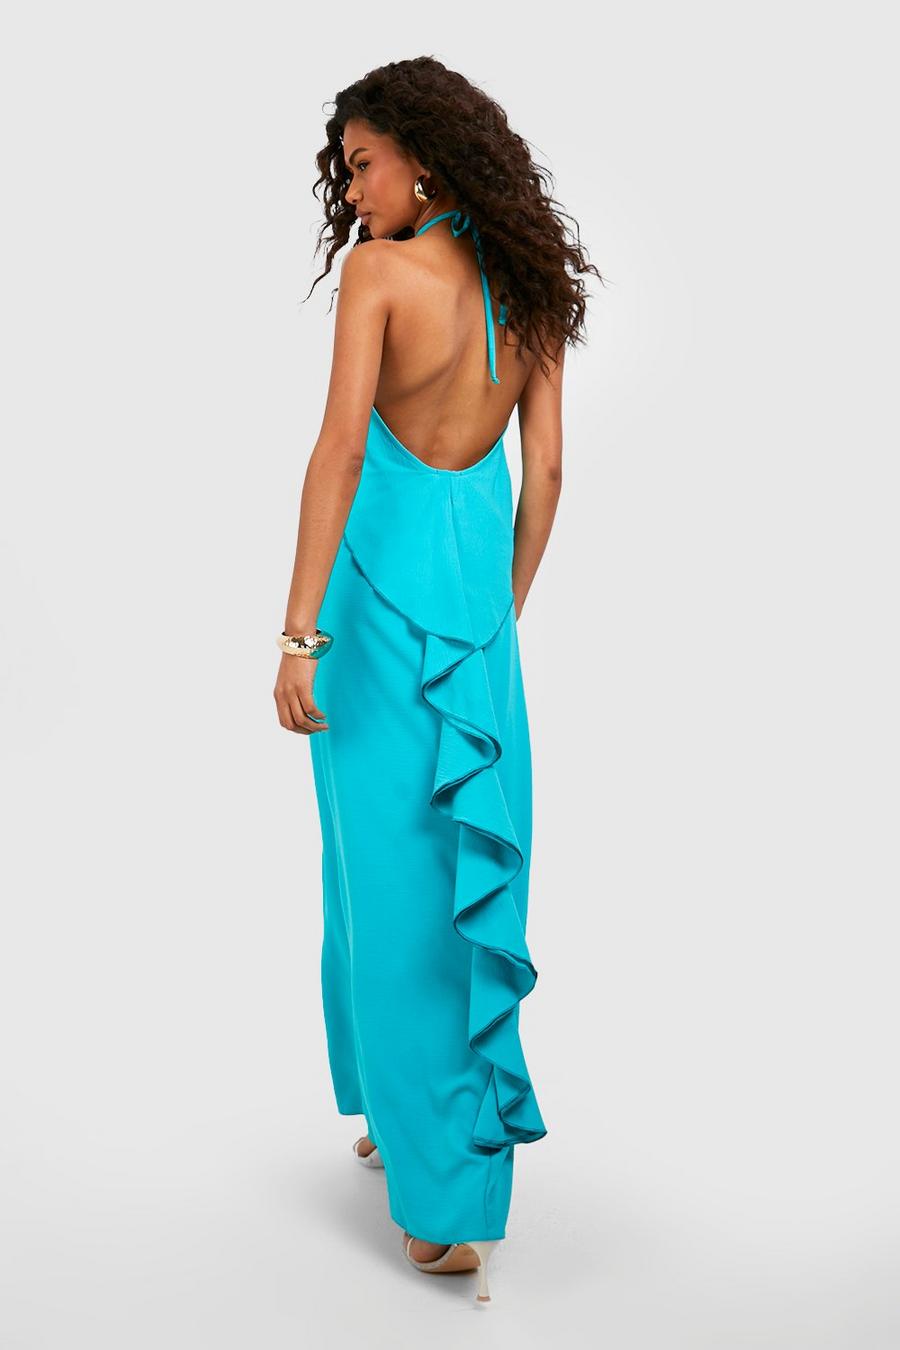 Aqua Cheesecloth Textured Low Back Ruffle Tiered Maxi Dress